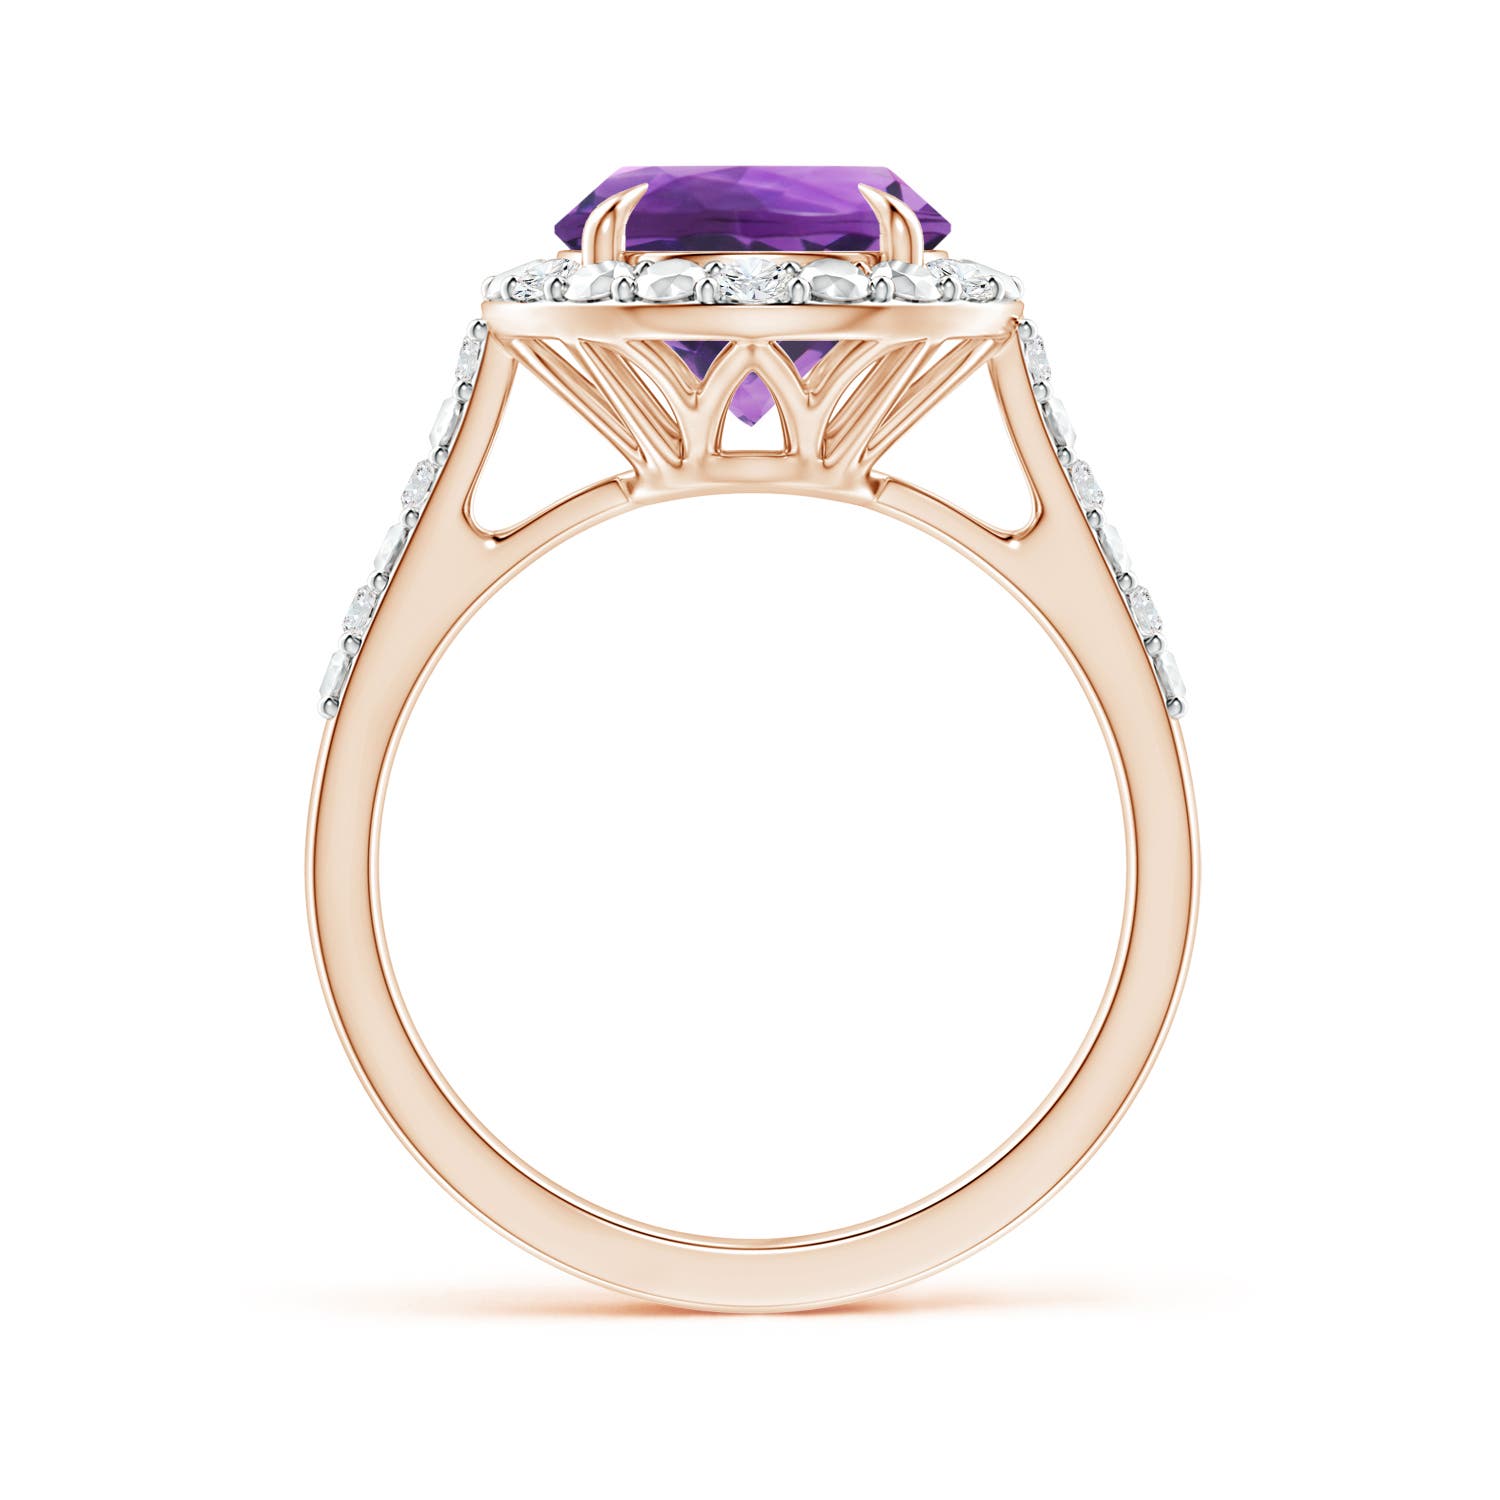 AAA - Amethyst / 2.61 CT / 14 KT Rose Gold